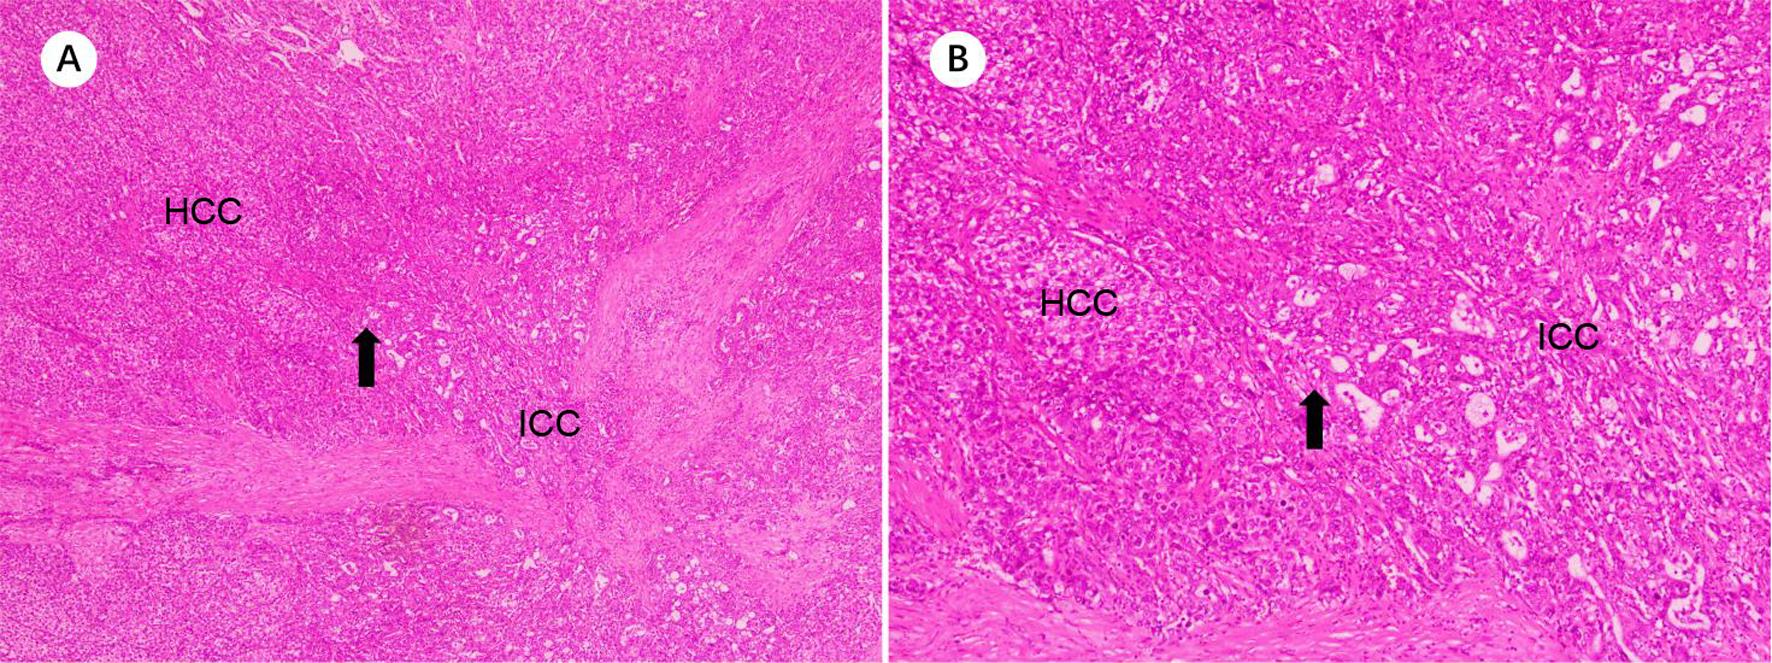 Combined hepatocellular-cholangiocarcinoma with a transition zone.